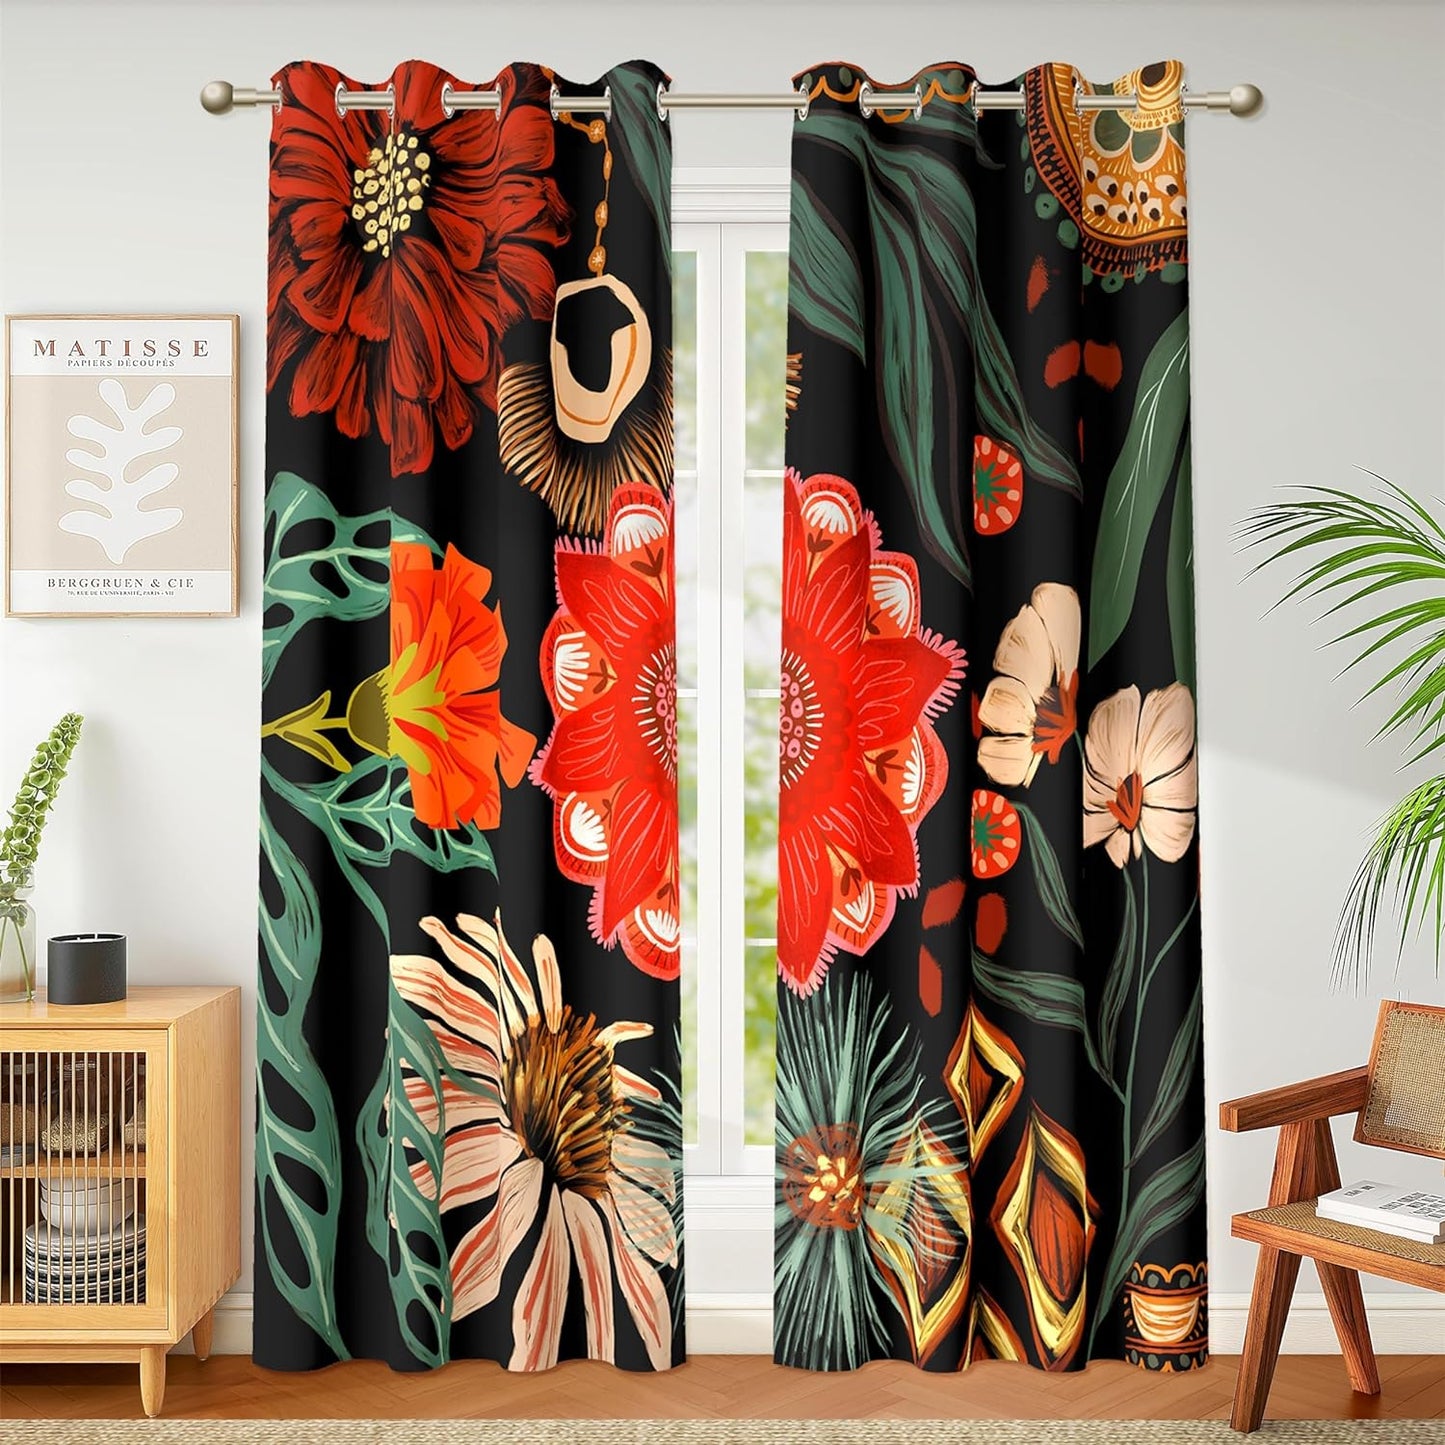 Boho Floral 100% Blackout Curtains for Living Room 96 Inch Long 2 Panels Mid Century Botanical Black Out Curtains for Bedroom Grommet Thermal Insulated Room Darkening Window Drapes,52Wx96L  Tyrot Black Boho Floral Print 52W X 84L Inch X 2 Panels 